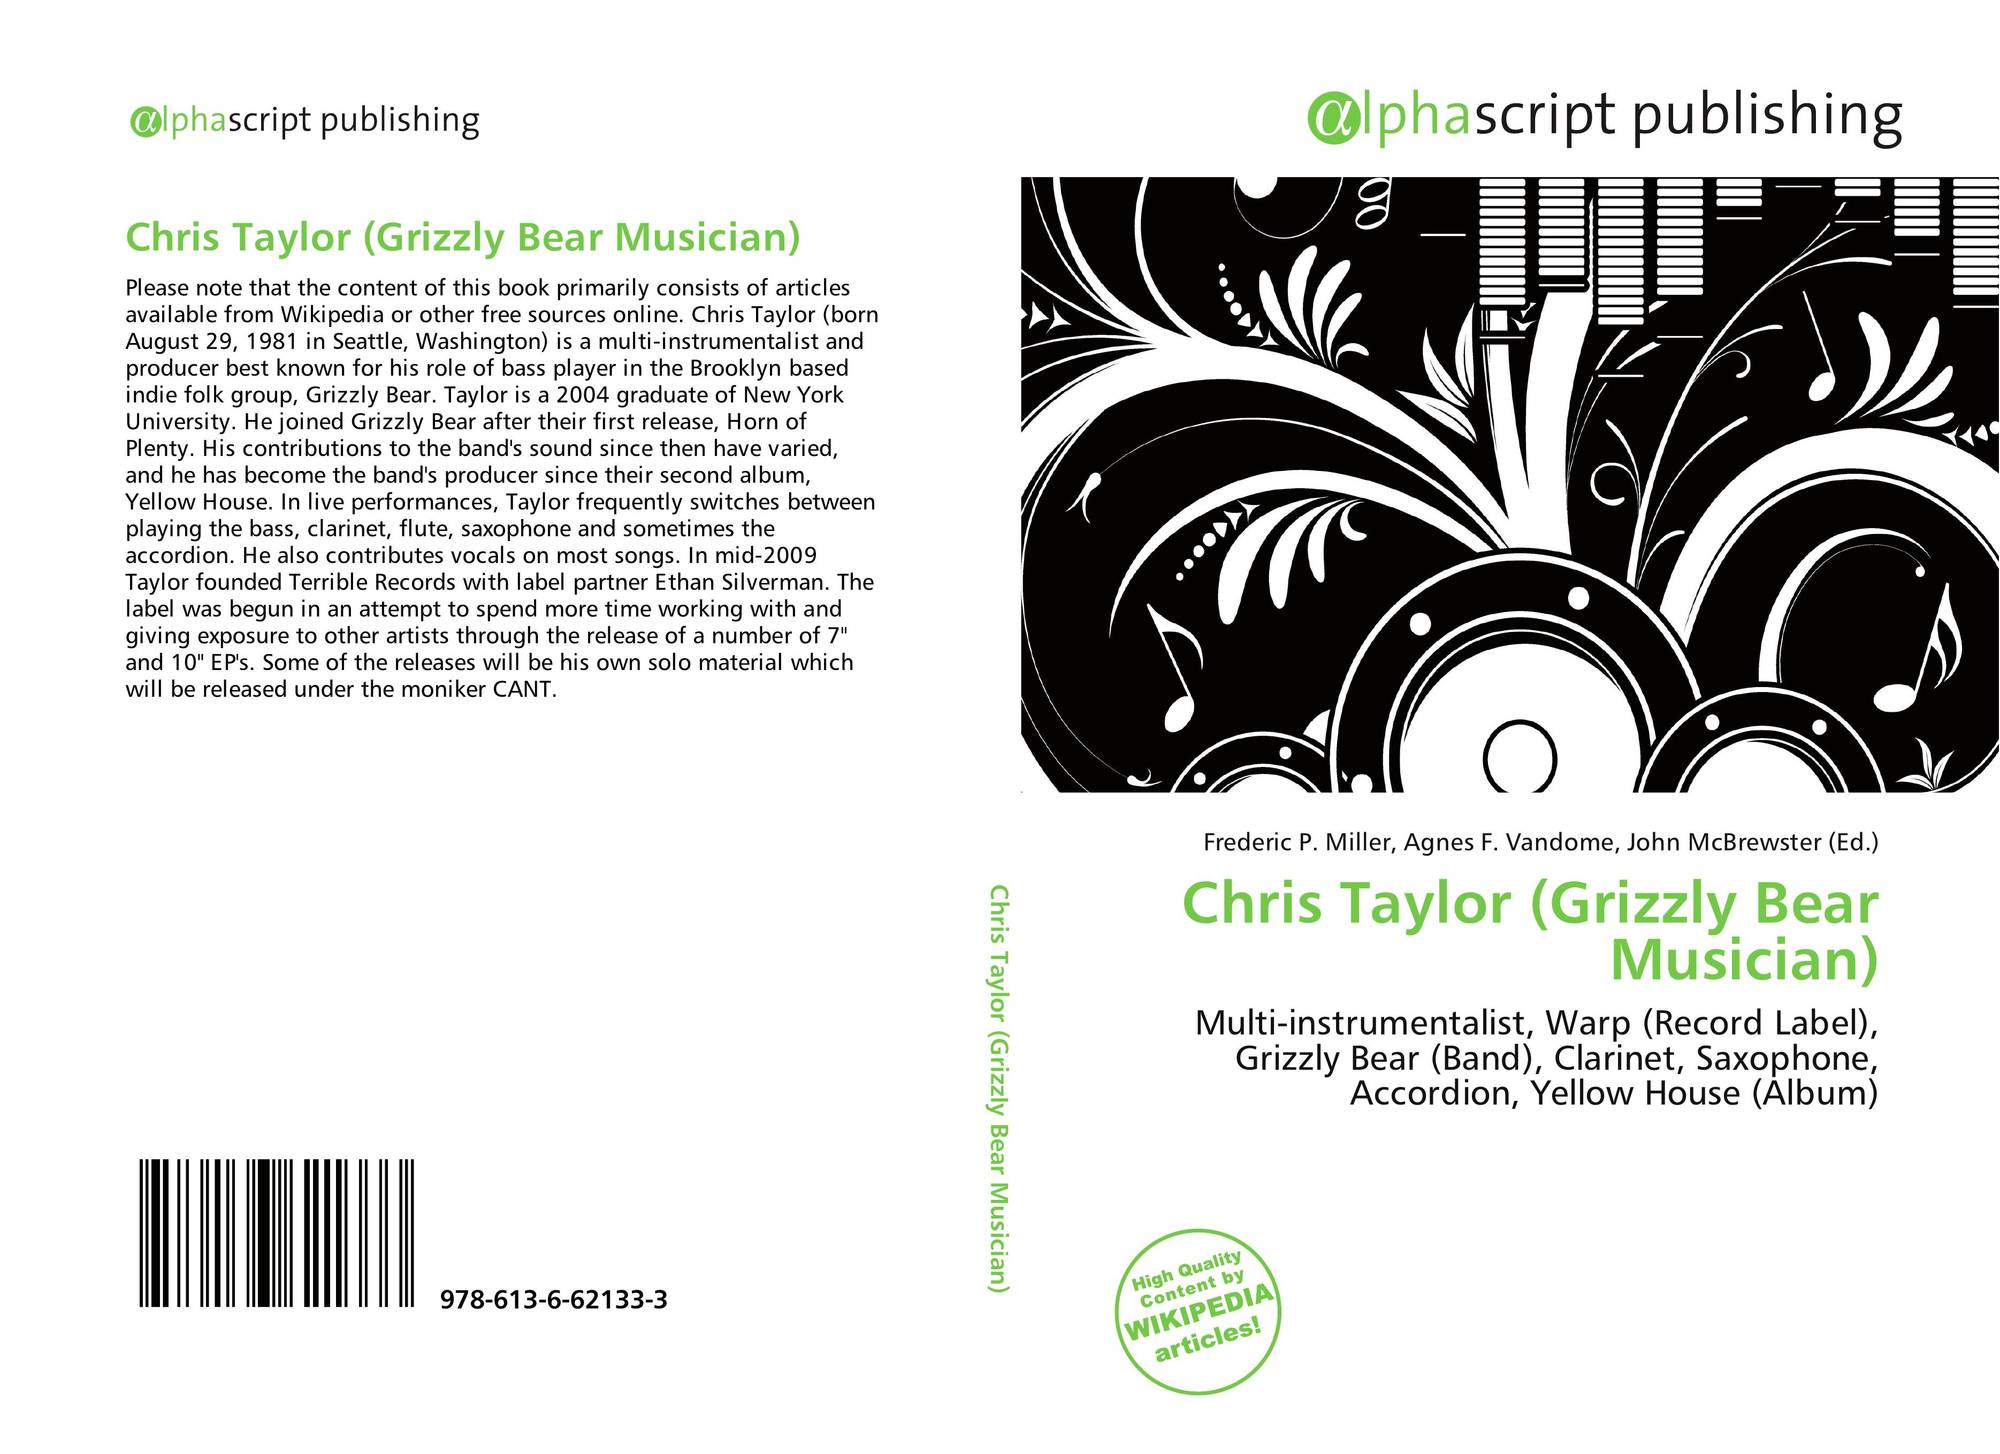 Chris Taylor Grizzly Bear Musician 978 613 6 62133 3